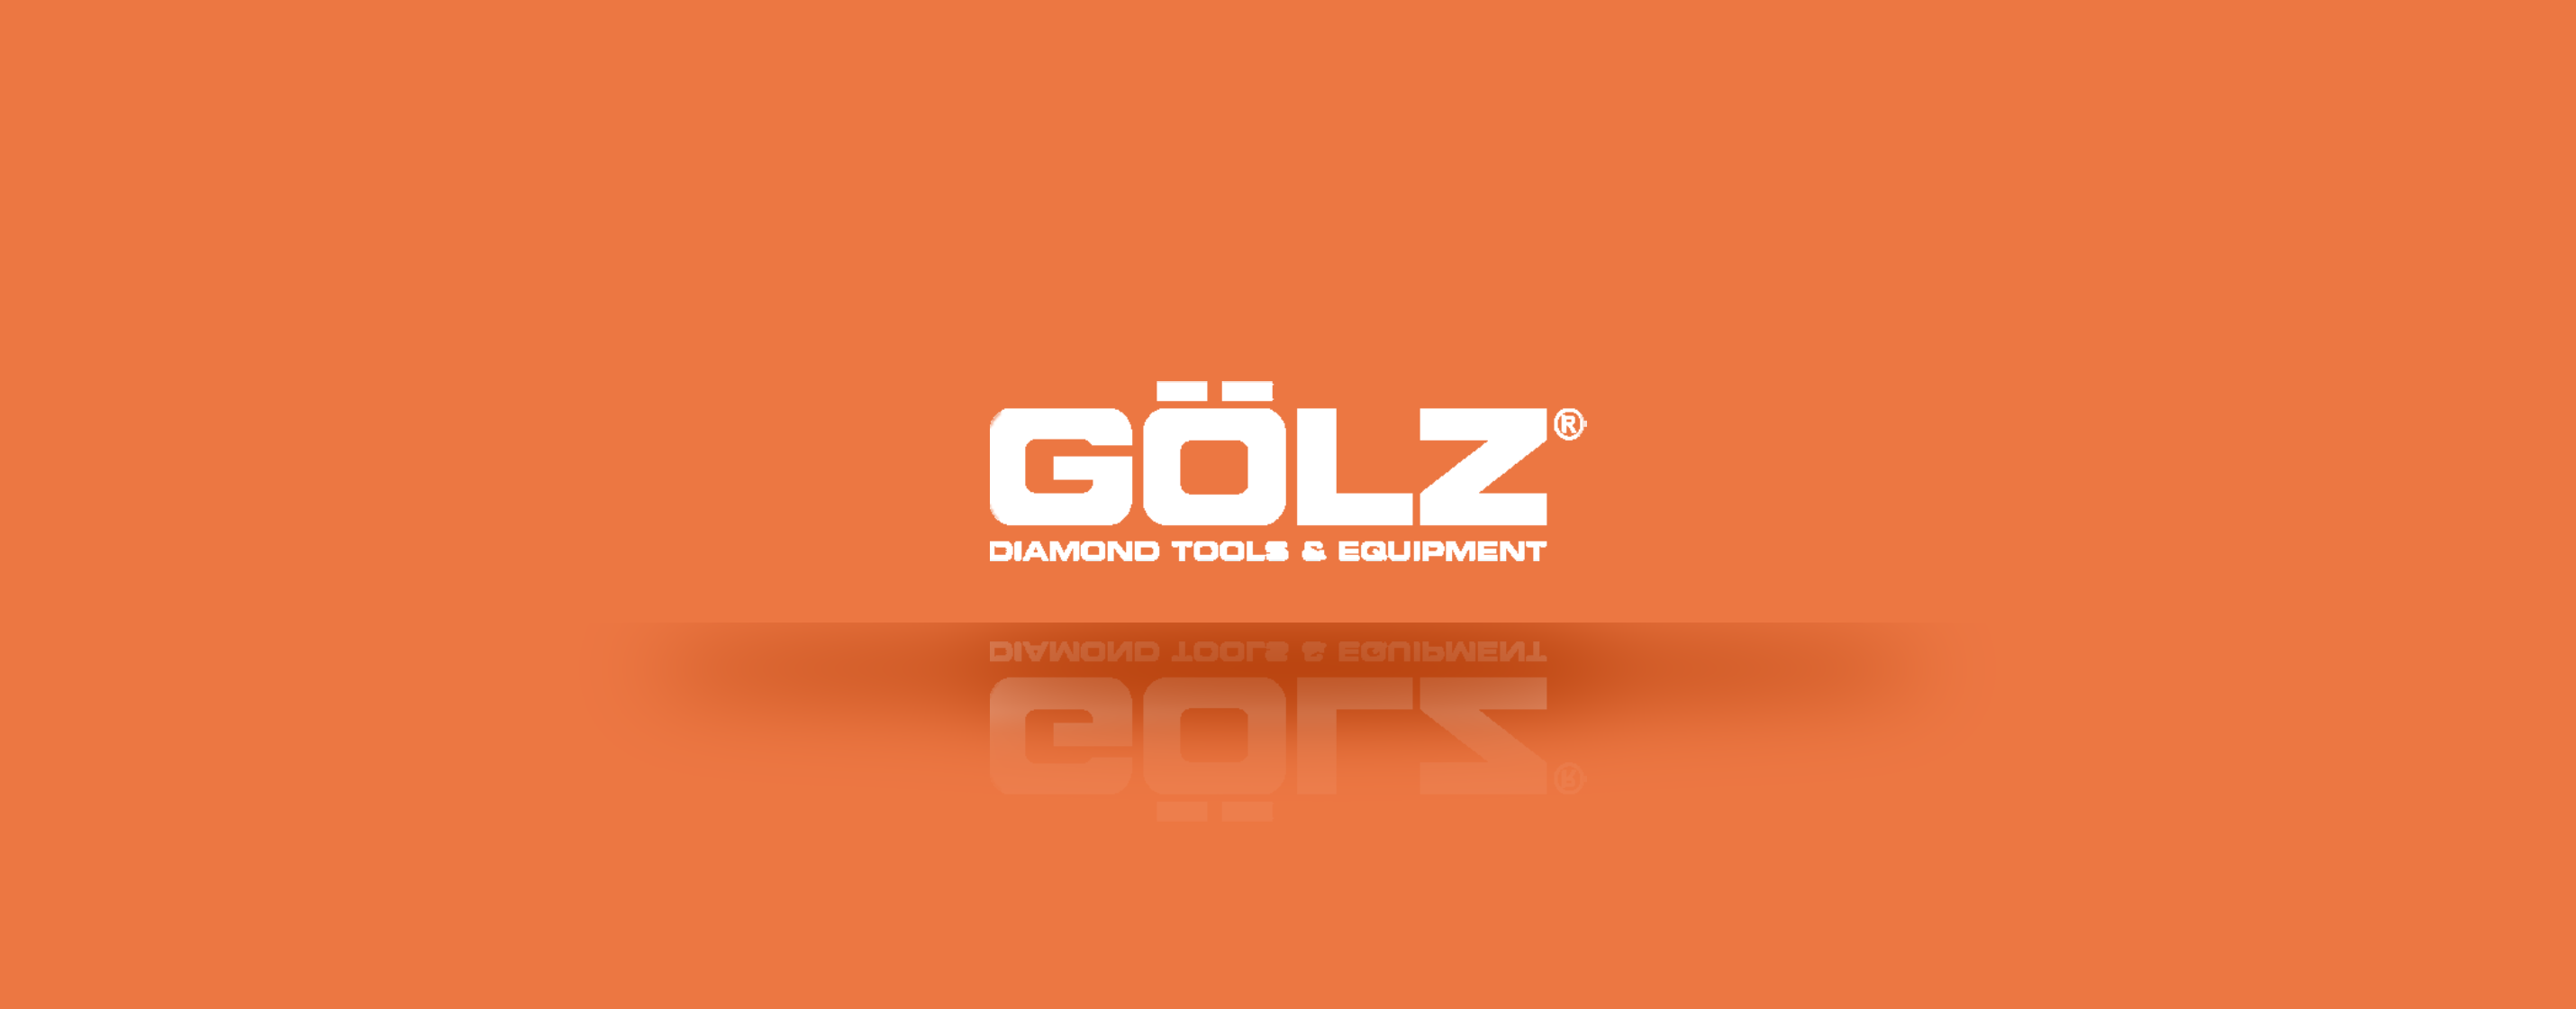 Golz_Mobile_87d3a619-f73a-4ac2-9a45-fe9b1cde2844.png